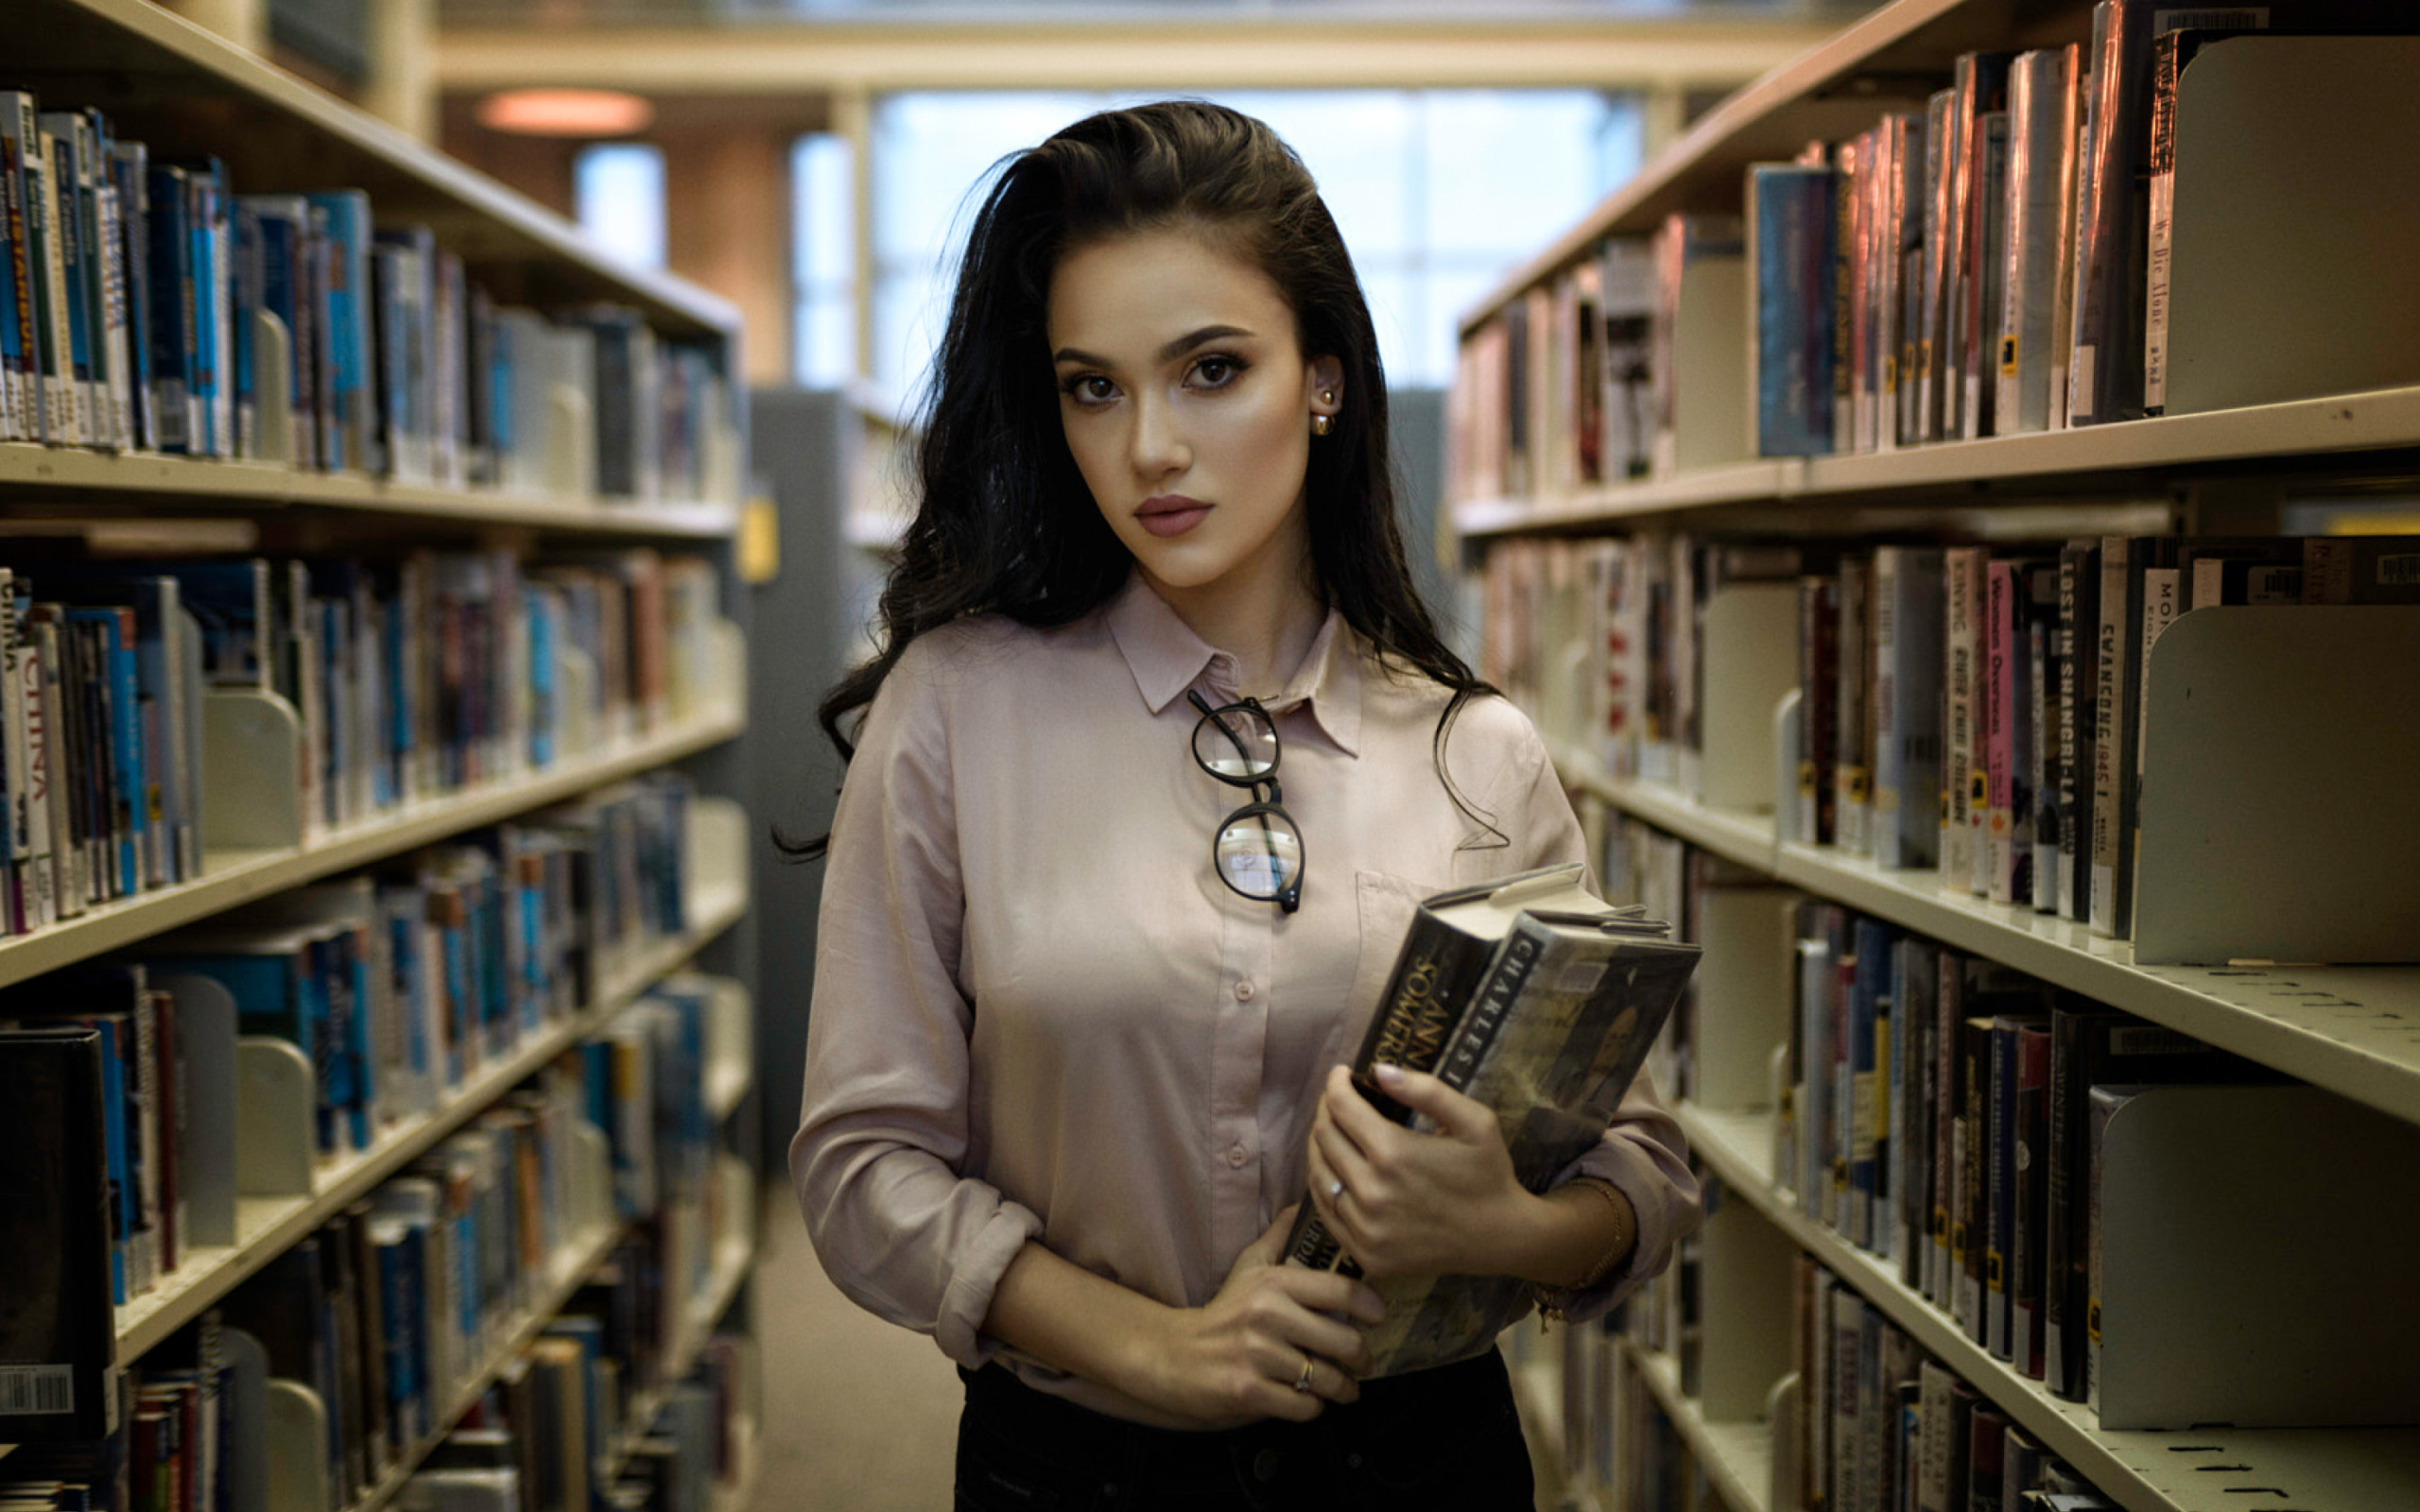 Girl with books in library wallpaper 2560x1600